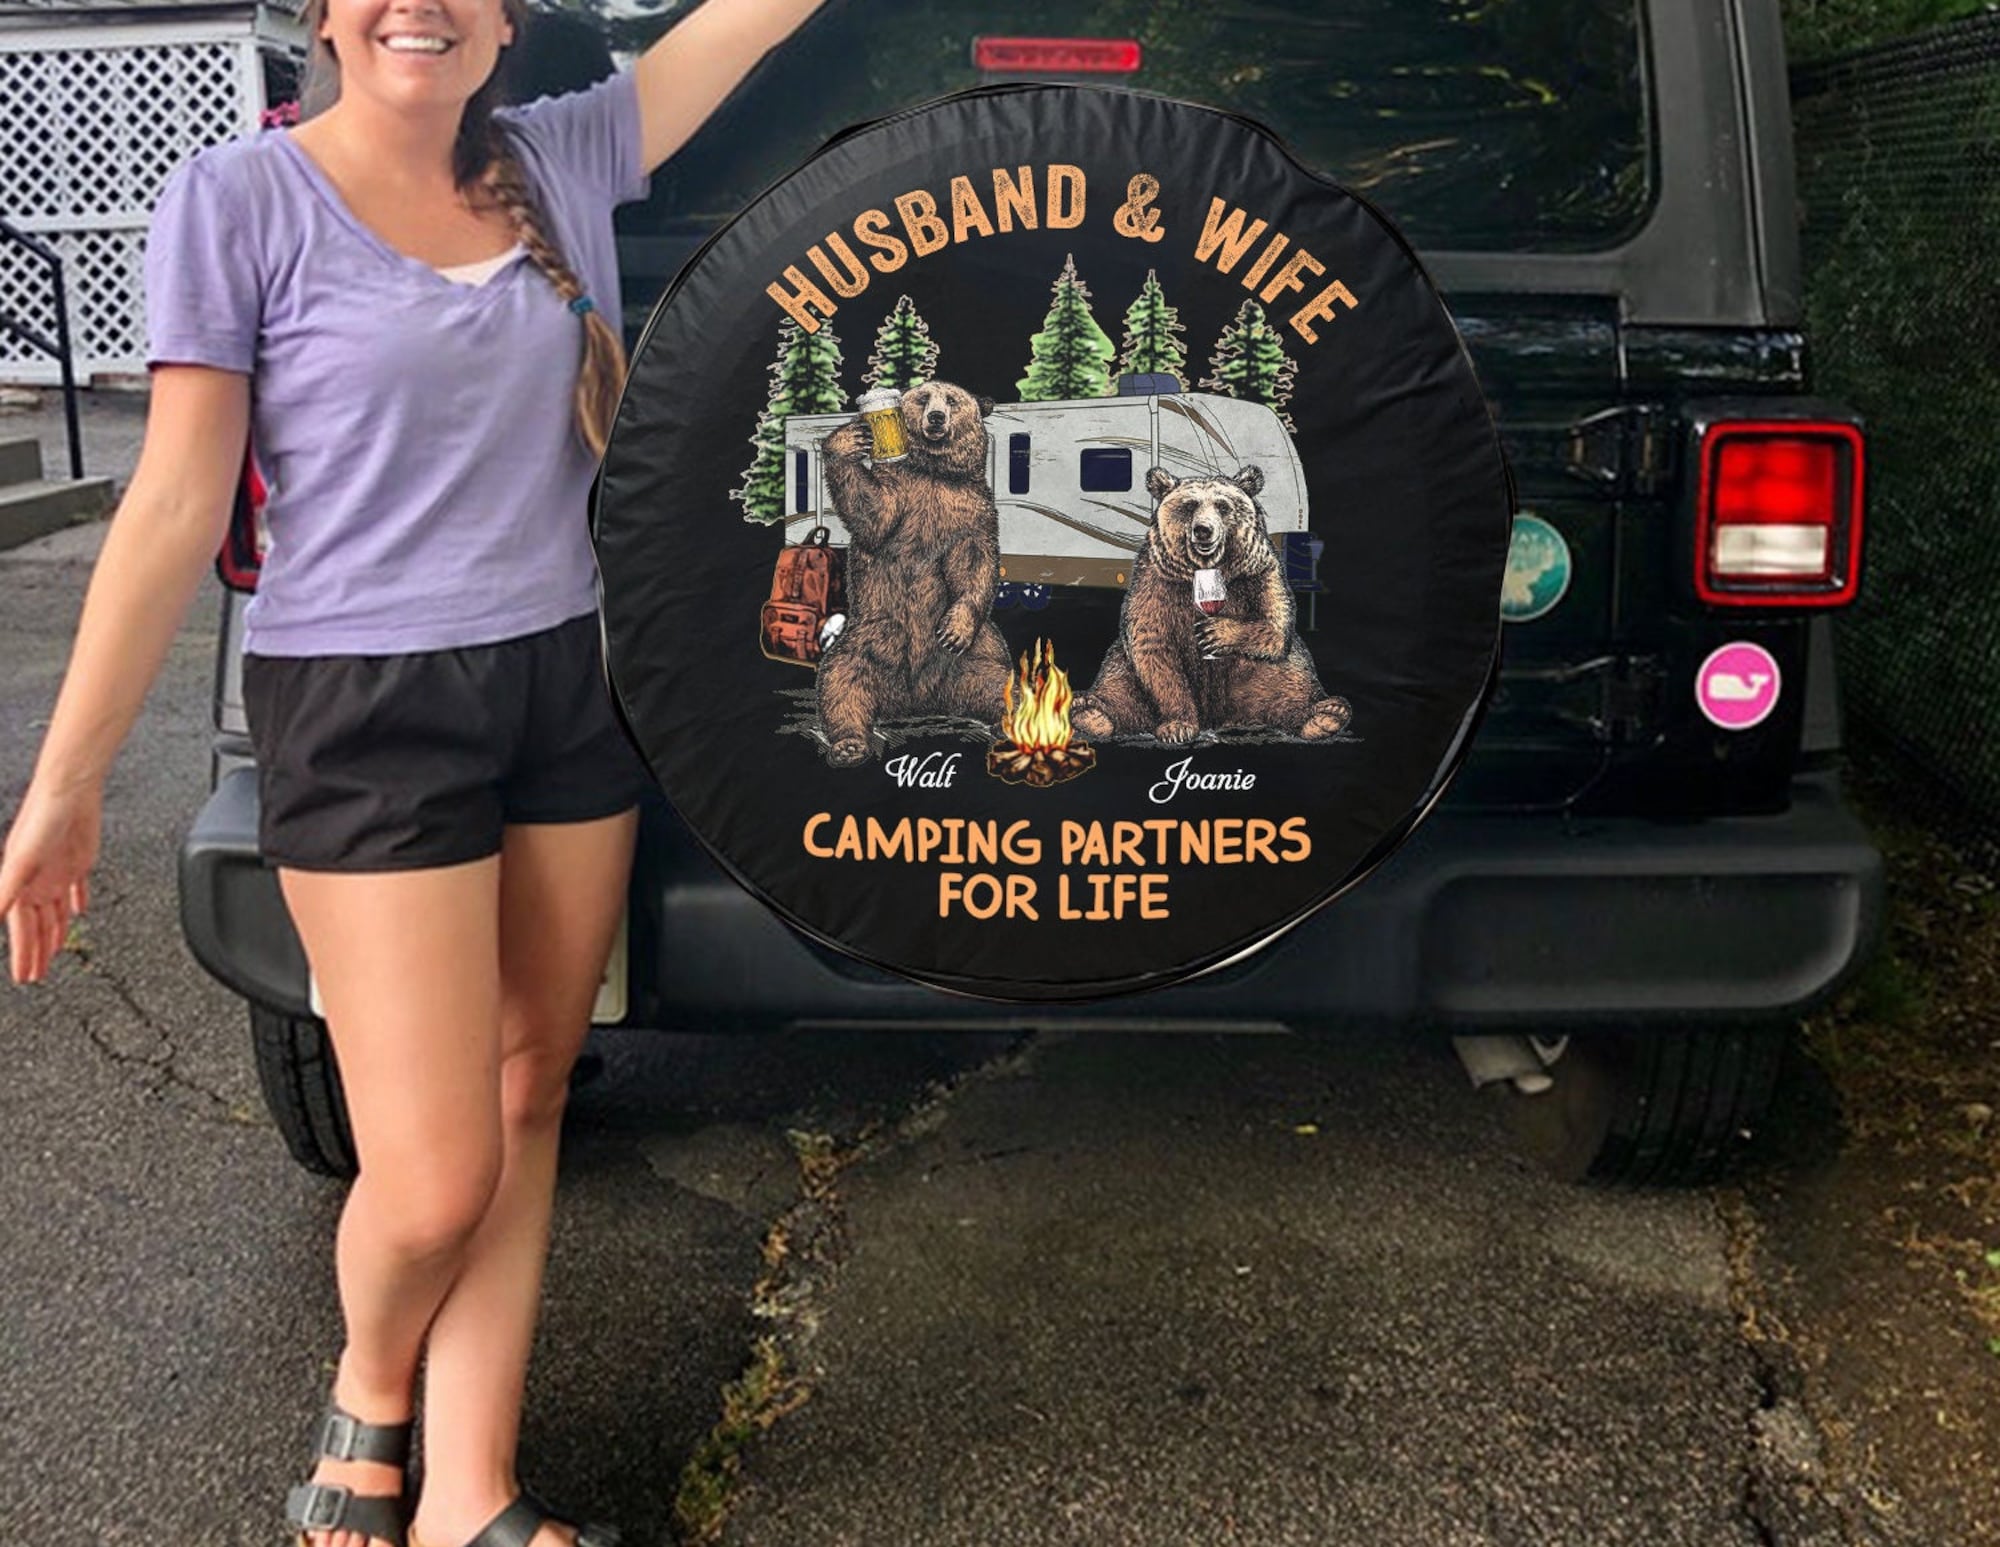 Husband & wife camping partner for life, camping tire cover, RV custom tire cover, personalized tire cover